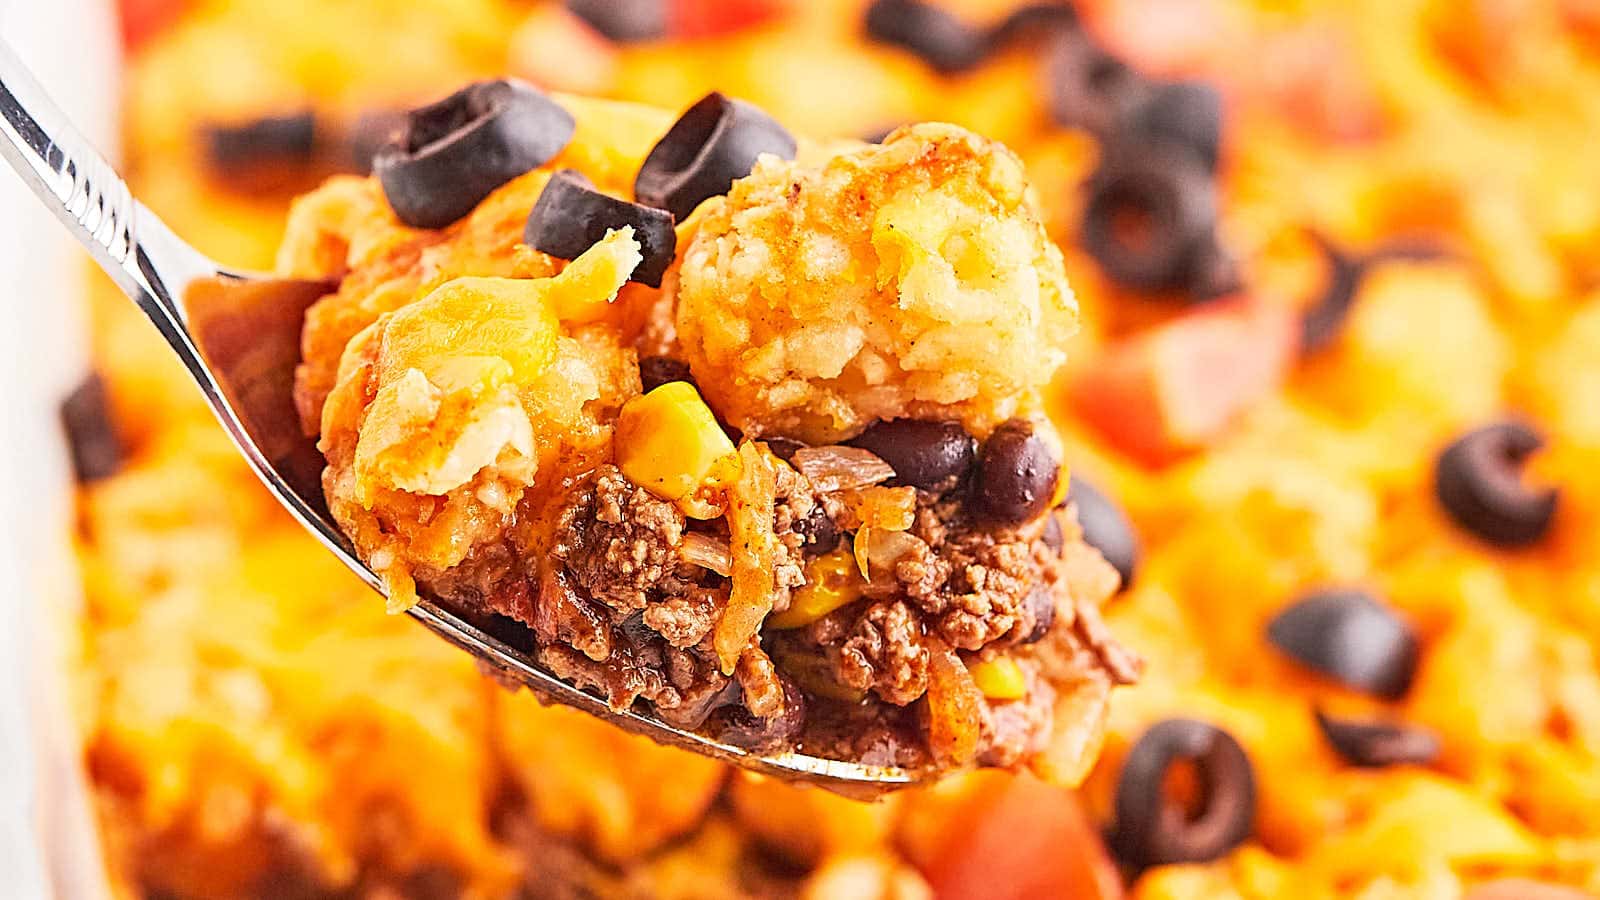 <p>This ground beef casserole is loaded with delicious Mexican food flavors, topped with tater tots, and finished with a layer of cheese. It's a real family favorite.</p><p><strong>Get the Recipe: <a href="https://cheerfulcook.com/taco-tater-tot-casserole/" rel="noreferrer noopener">Taco Tater Tot Casserole</a></strong></p>